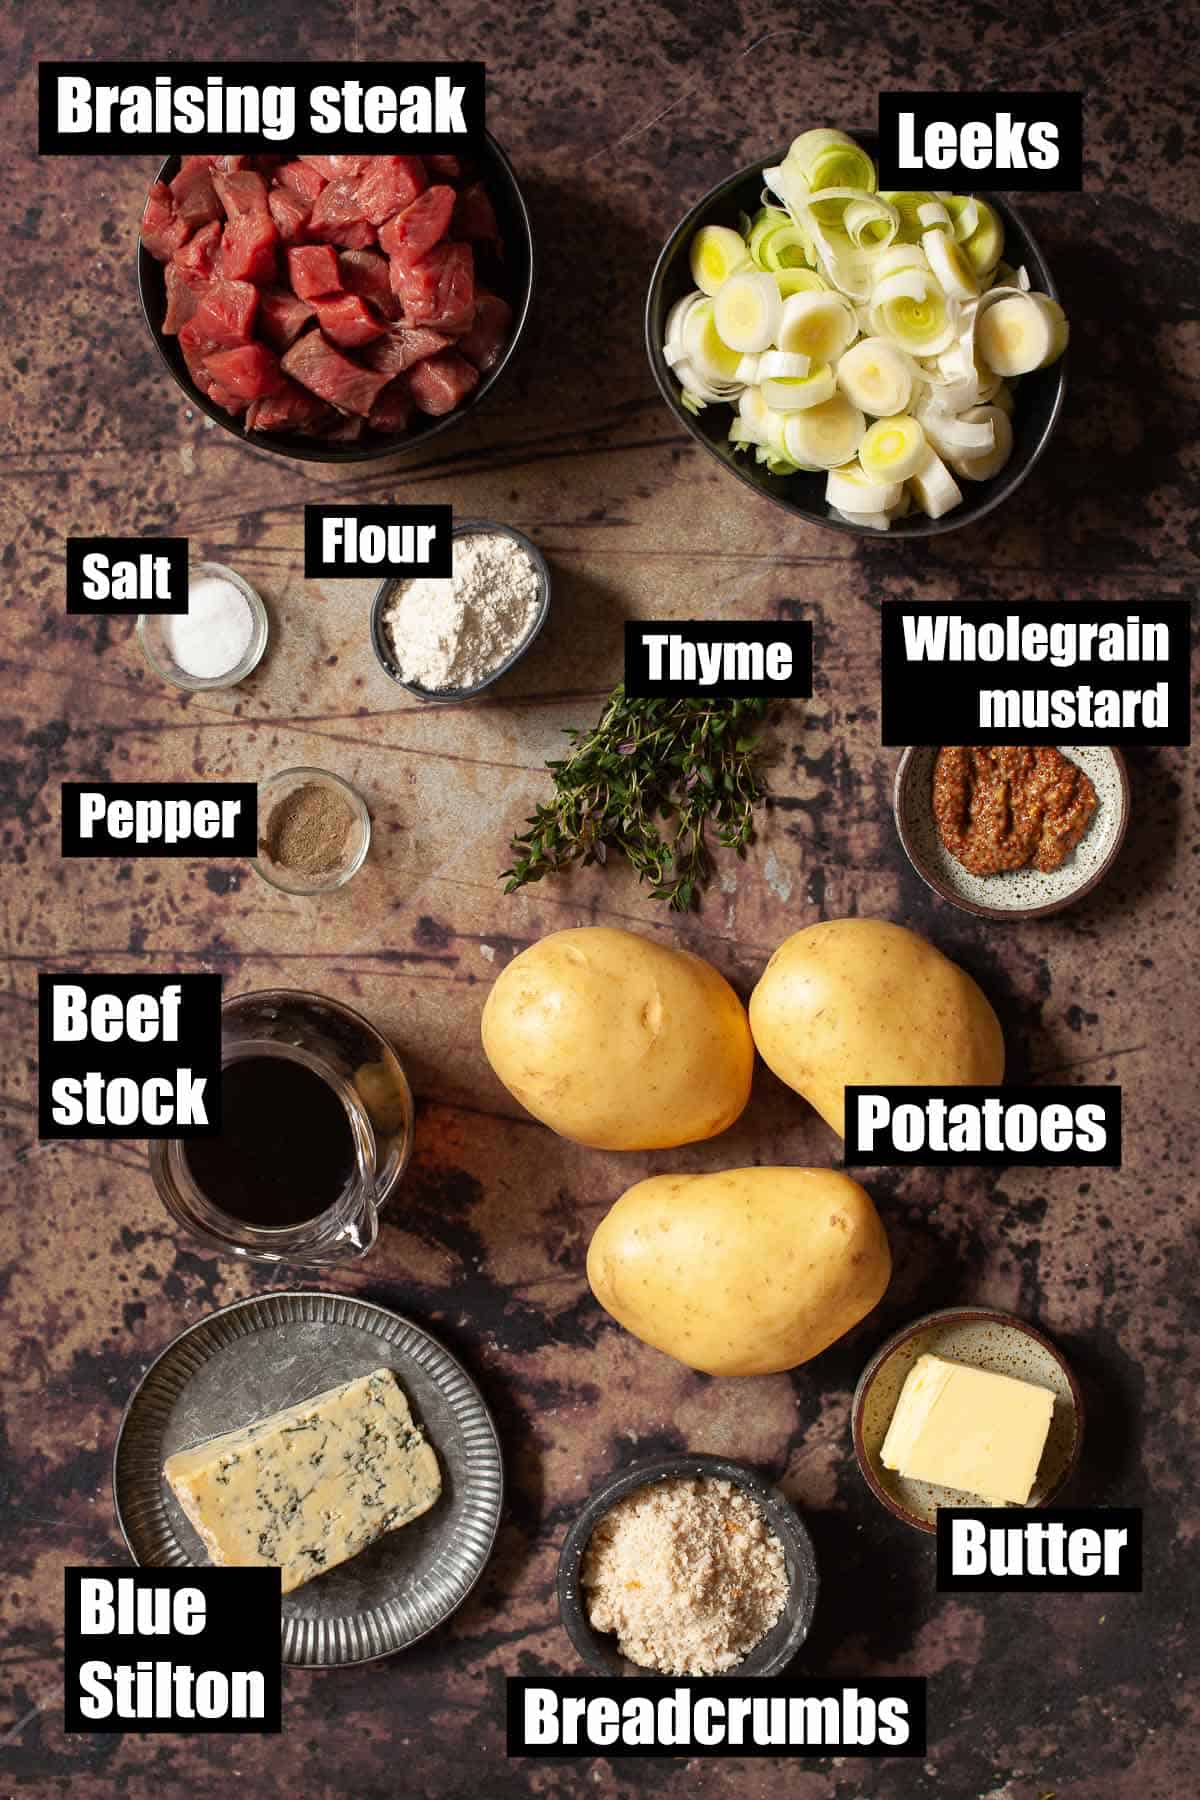 Ingredients for Nottinghamshire pie with text overlay.